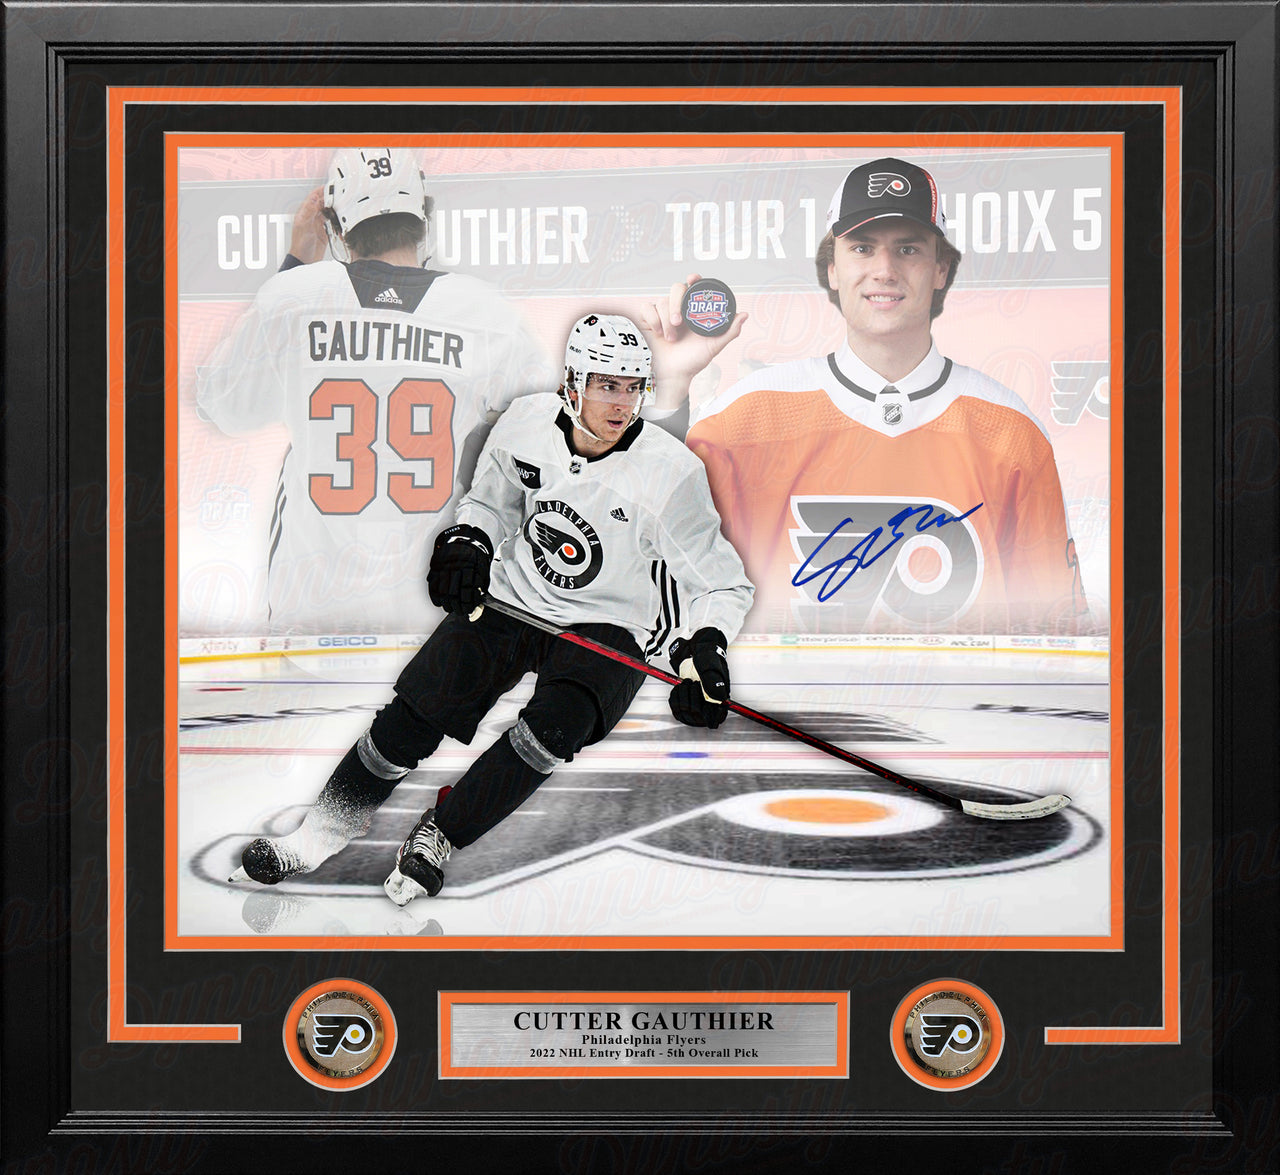 Cutter Gauthier Philadelphia Flyers Autographed 11" x 14" Framed Draft Hockey Collage Photo - Dynasty Sports & Framing 